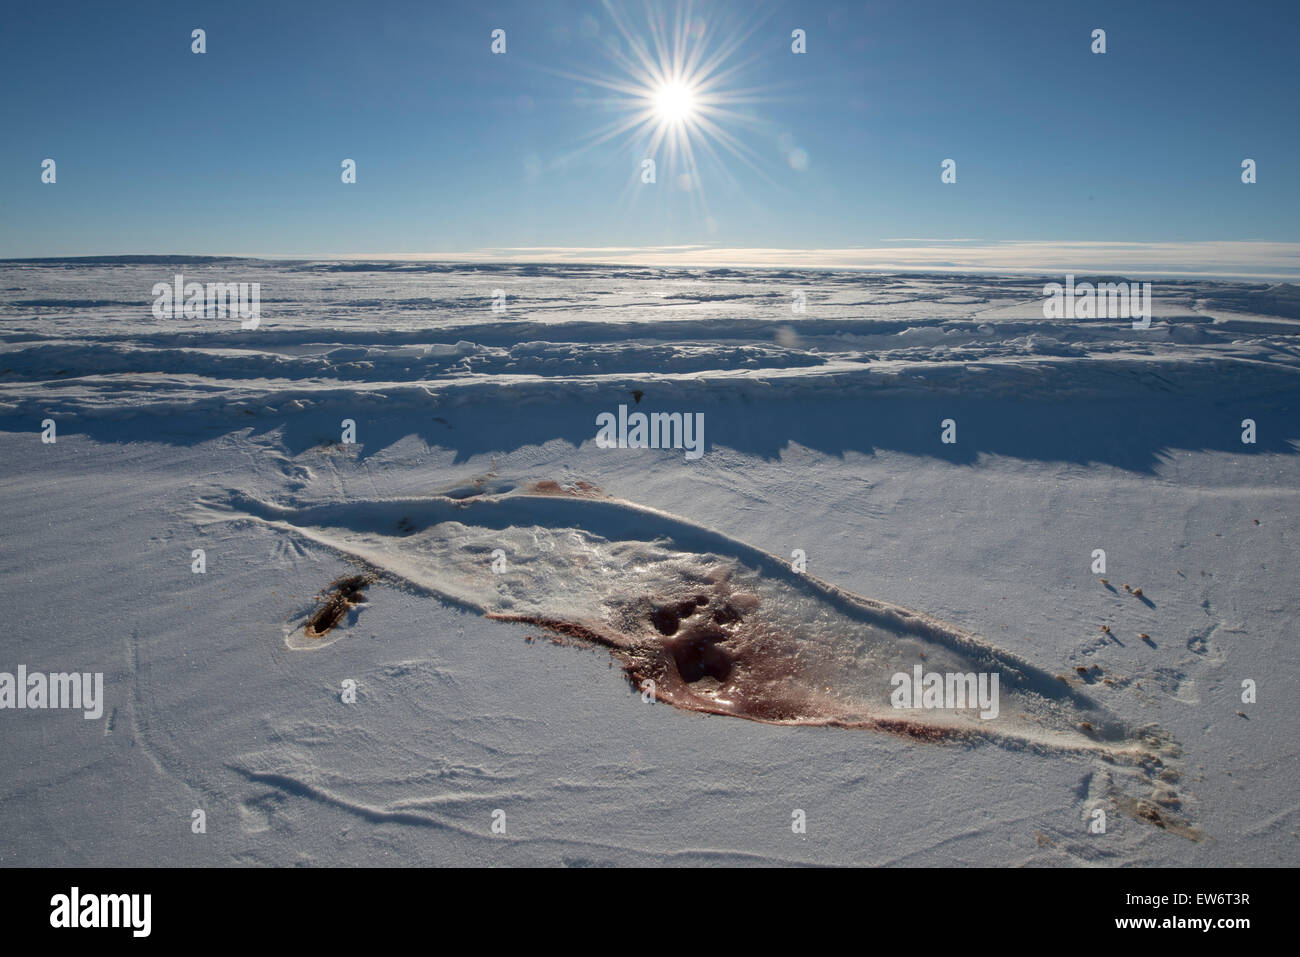 The imprint of an injured Weddell Seal on the sea ice, at Marble Point, Antarctica. Stock Photo